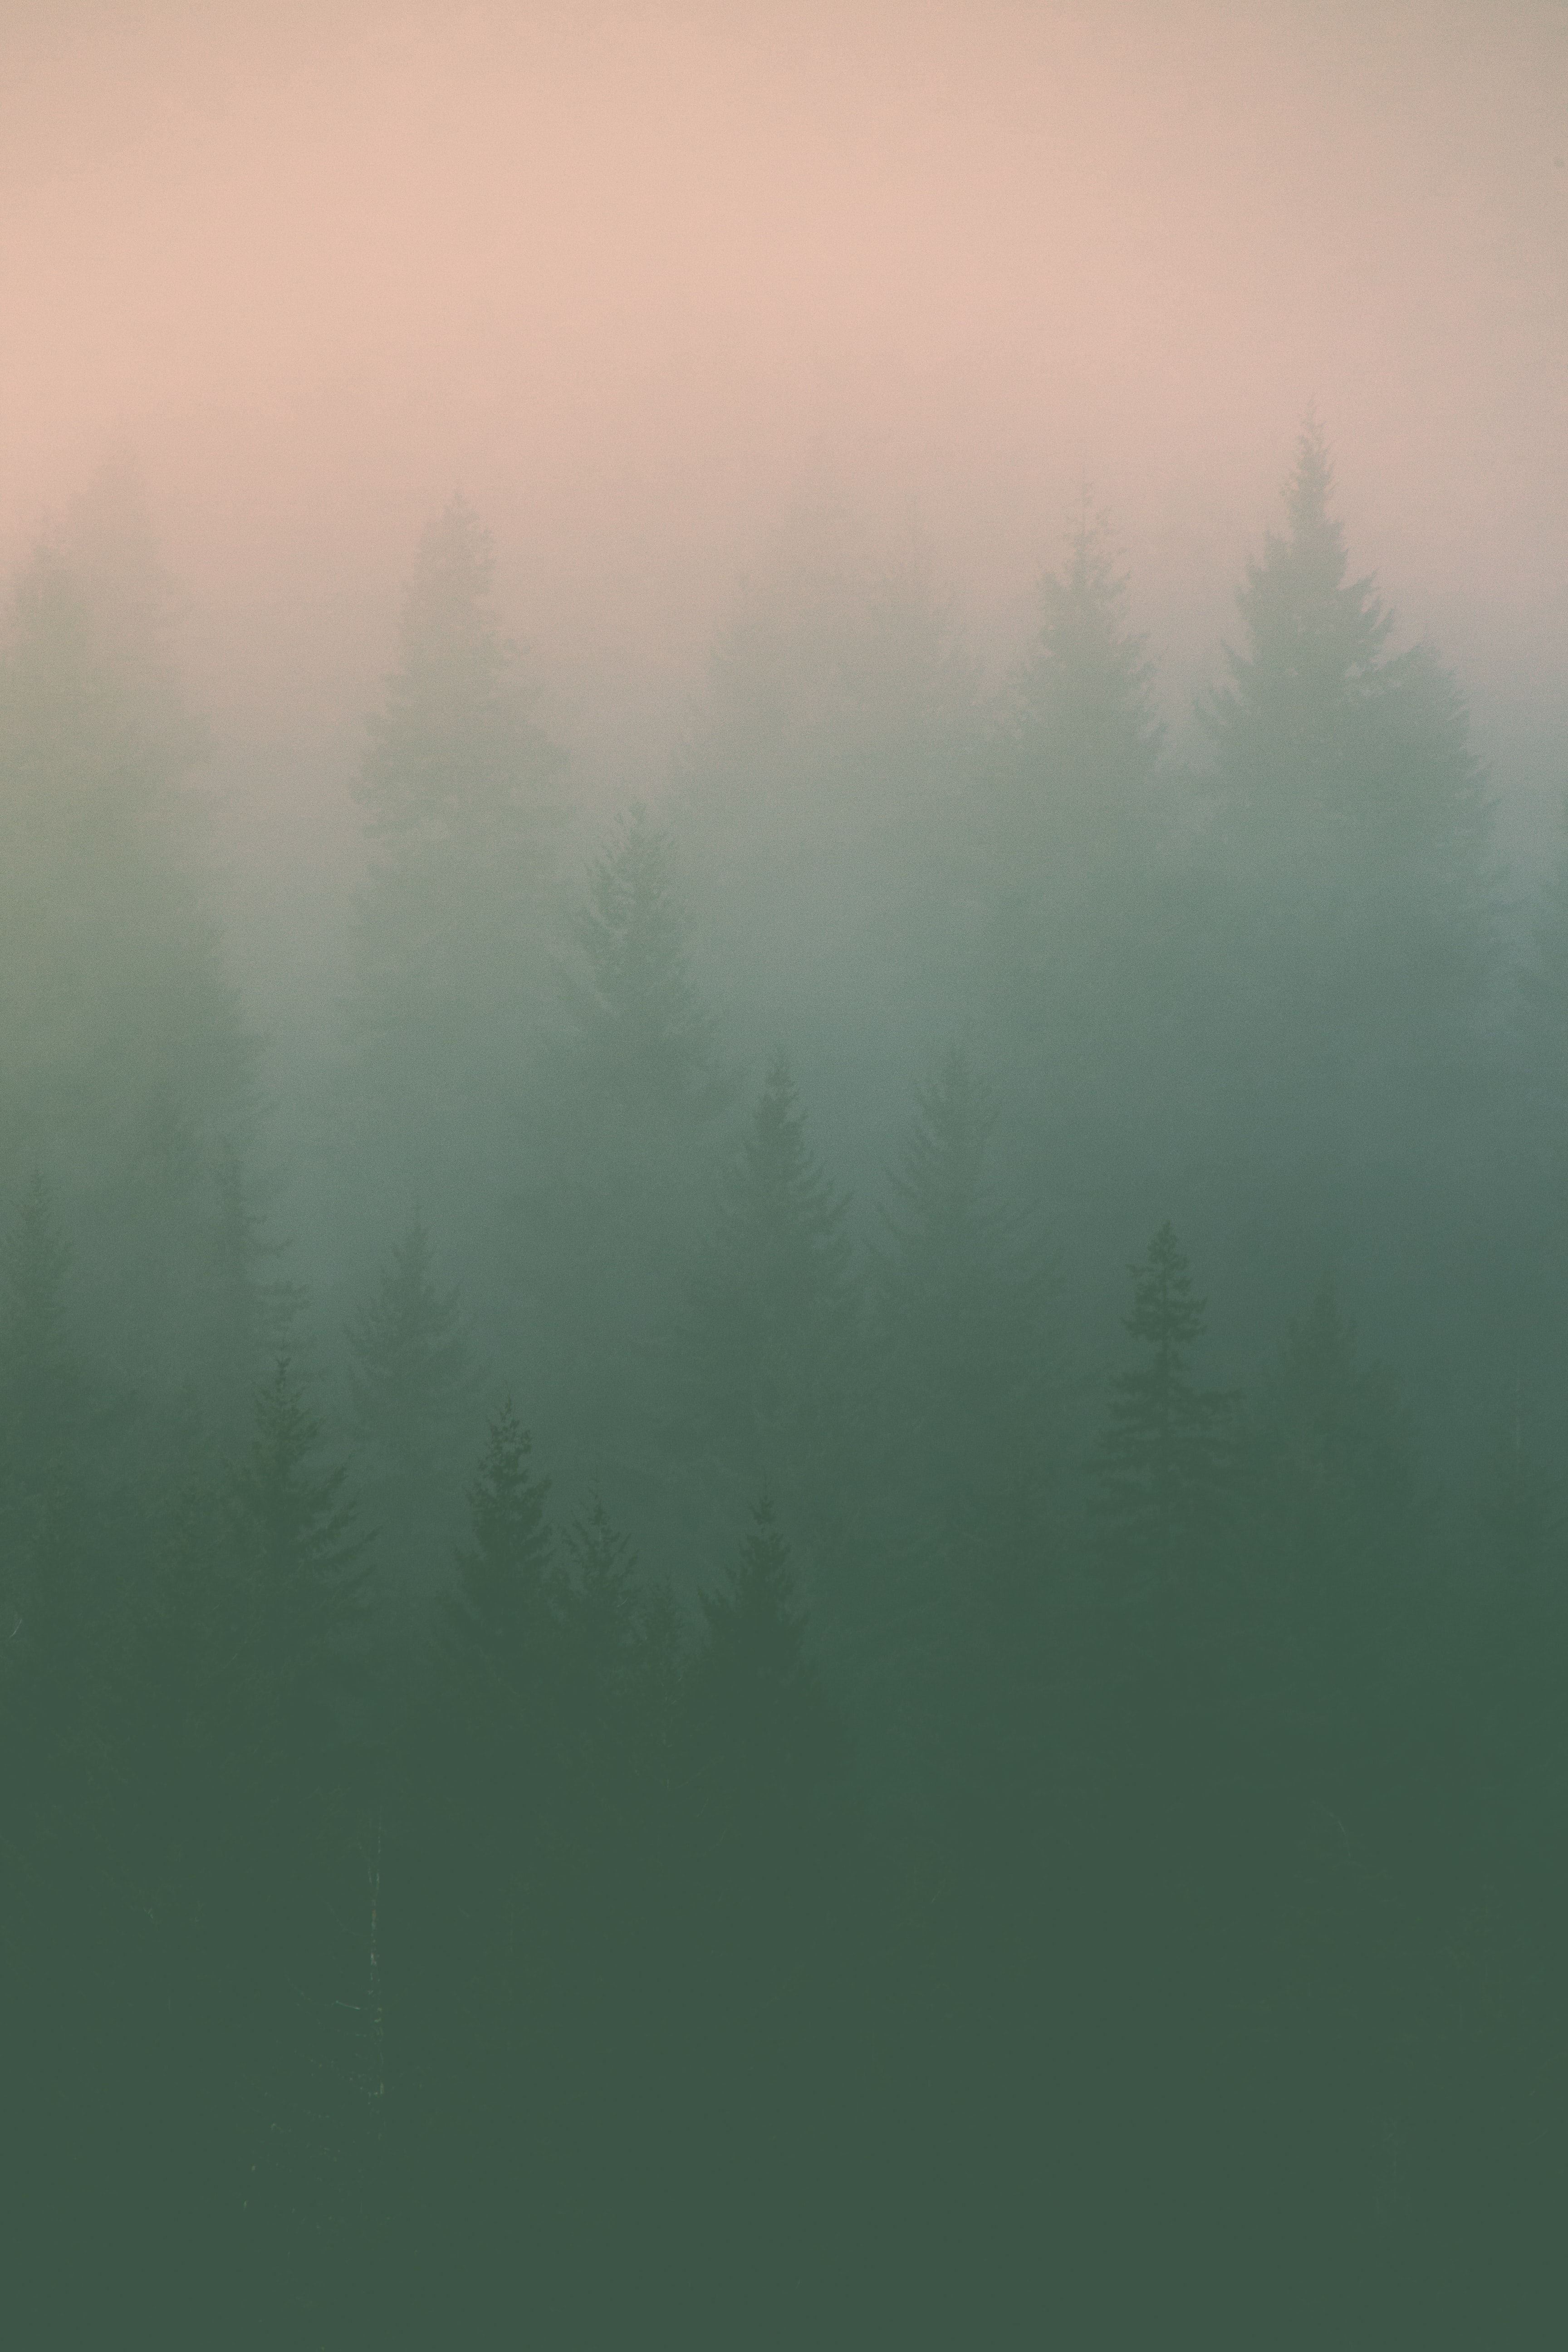 New Lock Screen Wallpapers nature, trees, fog, silhouettes, haze